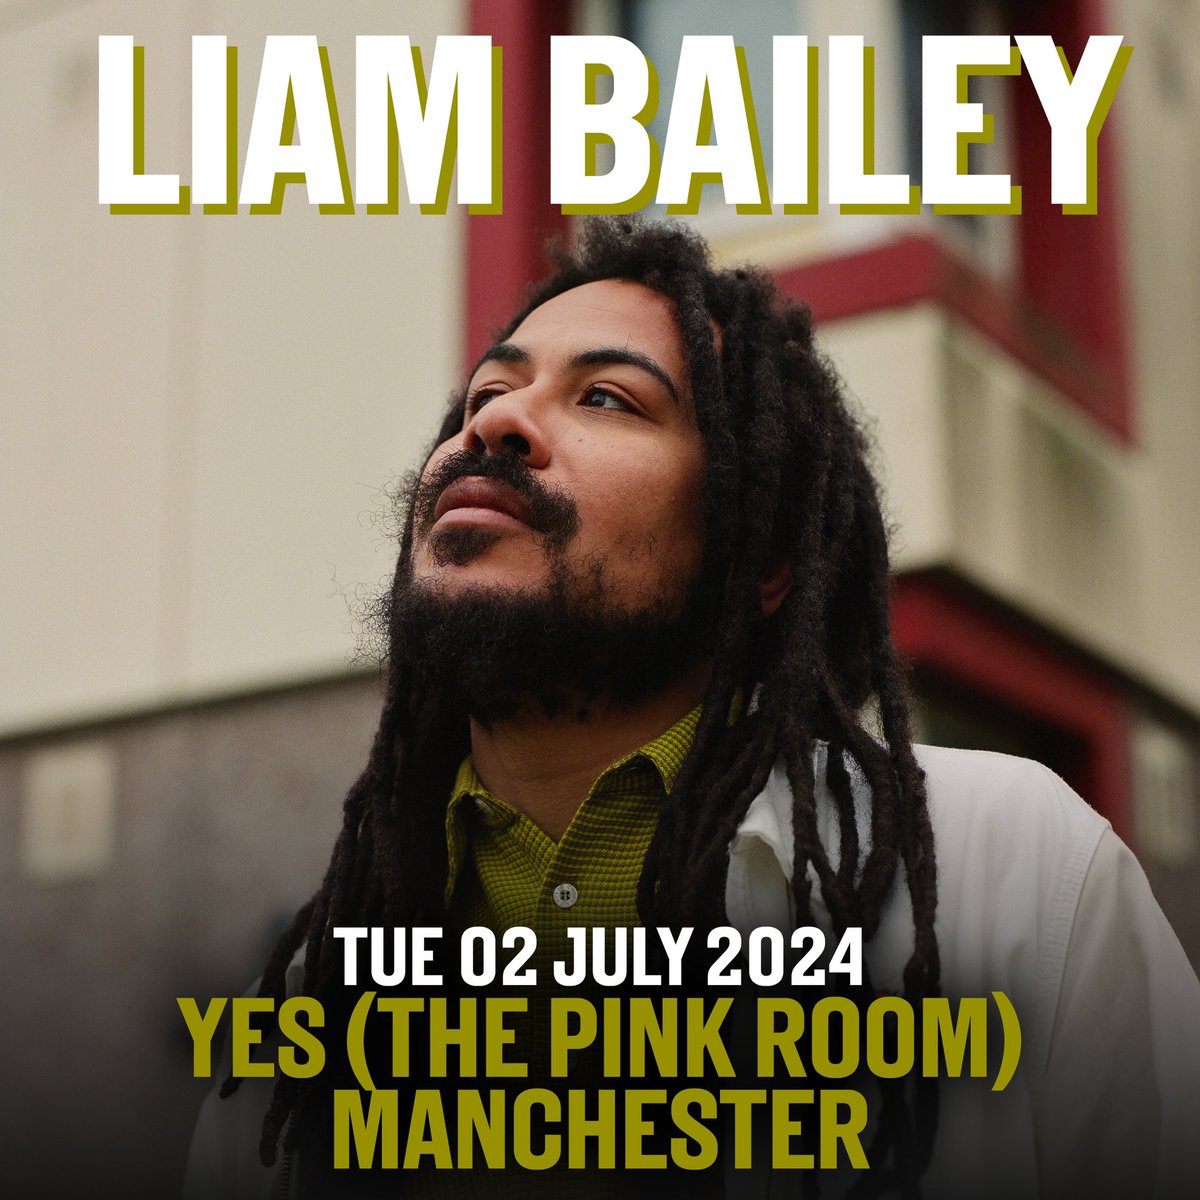 Just announced: @LiamBailey, Tuesday 2nd July 2024 [The Pink Room] Tickets on sale Thursday at 10am.